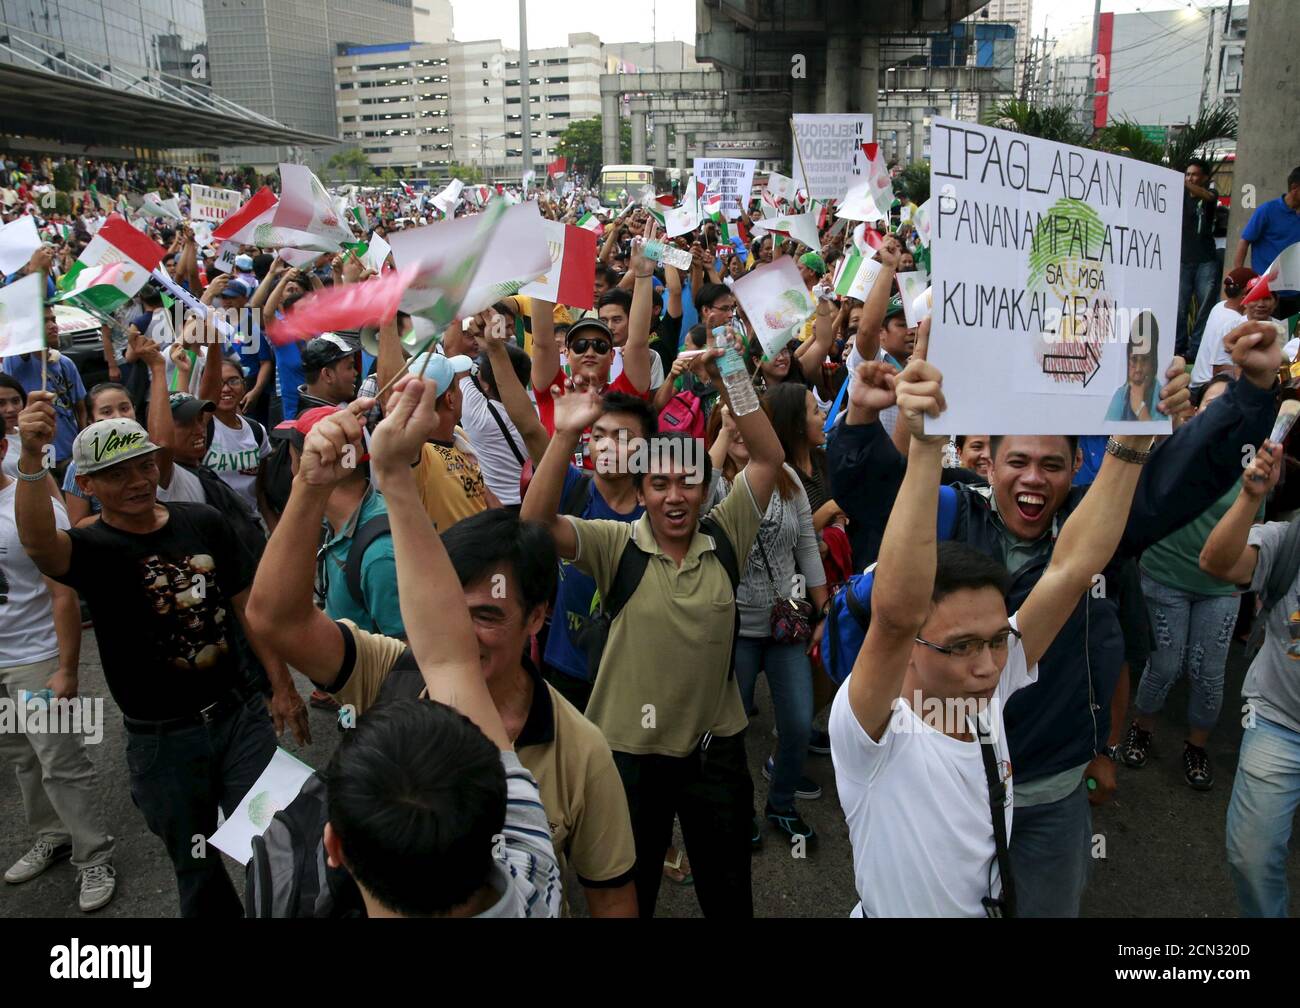 Protesters belonging to the Iglesia ni Cristo (Church of Christ) group march along EDSA highway in Mandaluyong, Metro Manila August 30, 2015. Thousands of members of the Christian group occupied the busy highway in Manila for a second night on Saturday, protesting against what they say is government intrusion in church affairs. The placard (R) reads,  'Fight for our religious belief'.  REUTERS/Romeo Ranoco Stock Photo